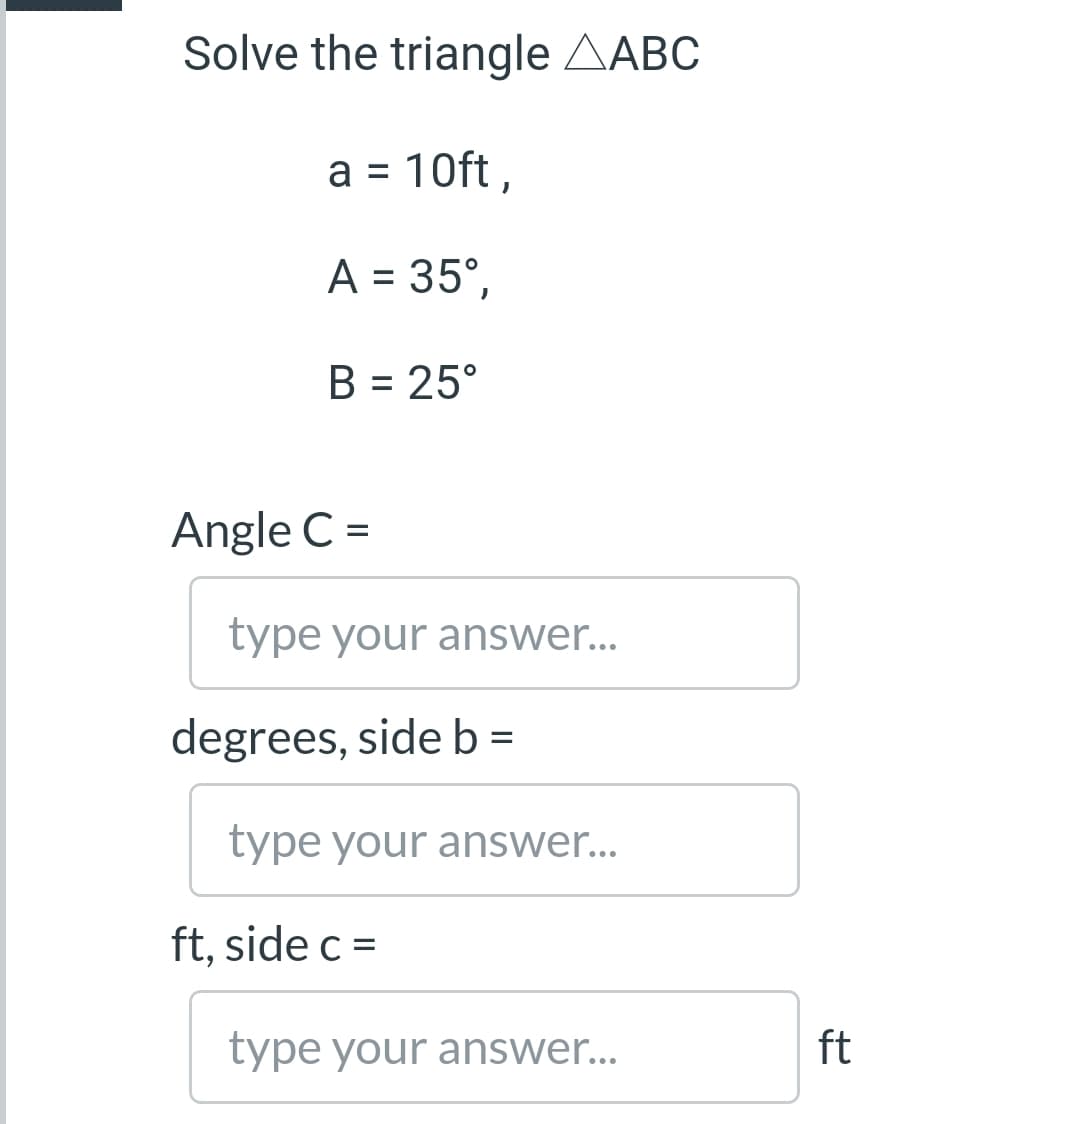 Solve the triangle AABC
a = 10ft ,
%3D
A = 35°,
B = 25°
%3D
Angle C =
type your answer...
degrees, side b =
type your answer...
ft, side c =
type your answer...
ft
